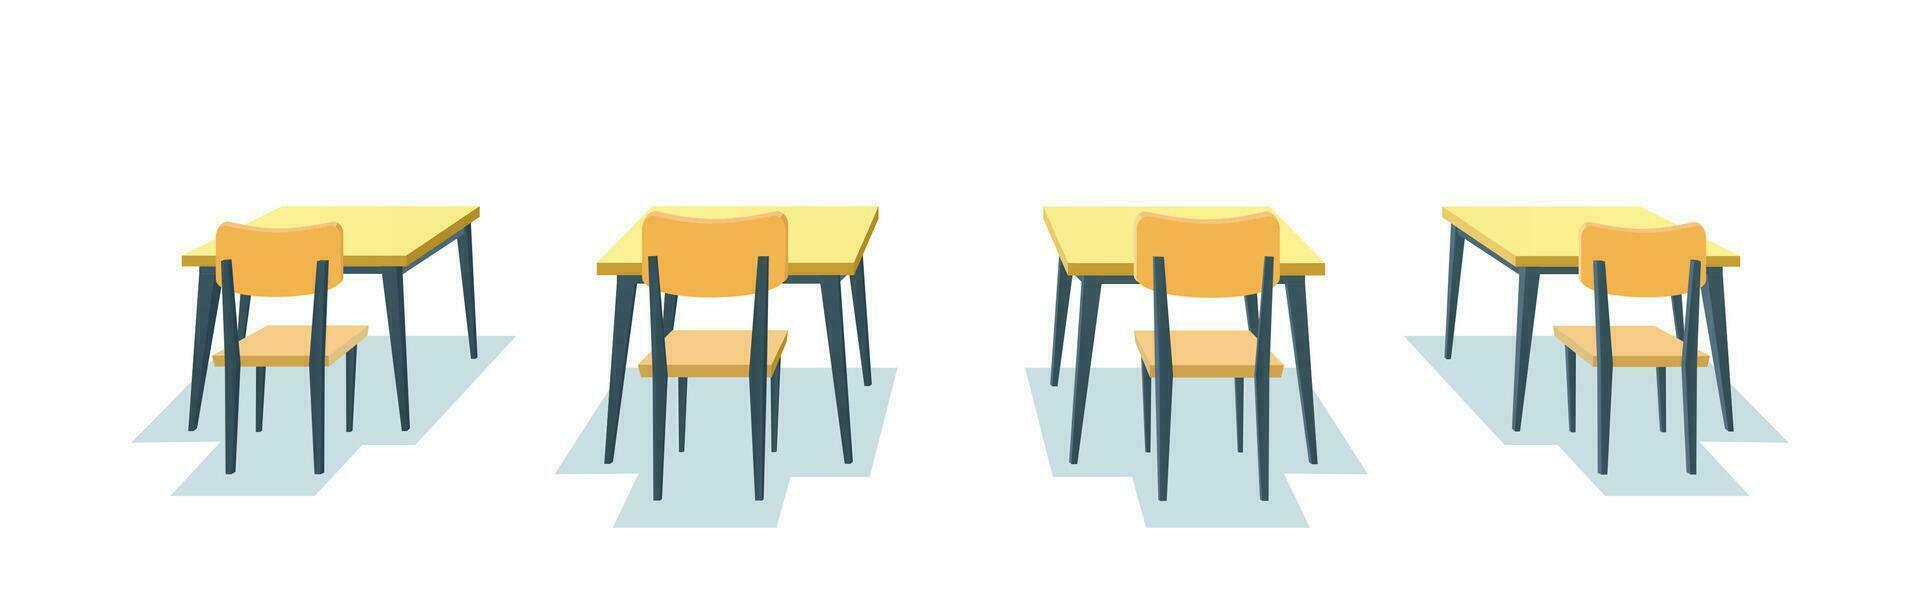 School desk isolated on white background. wooden desk table and chair. Vector illustration in a flat style